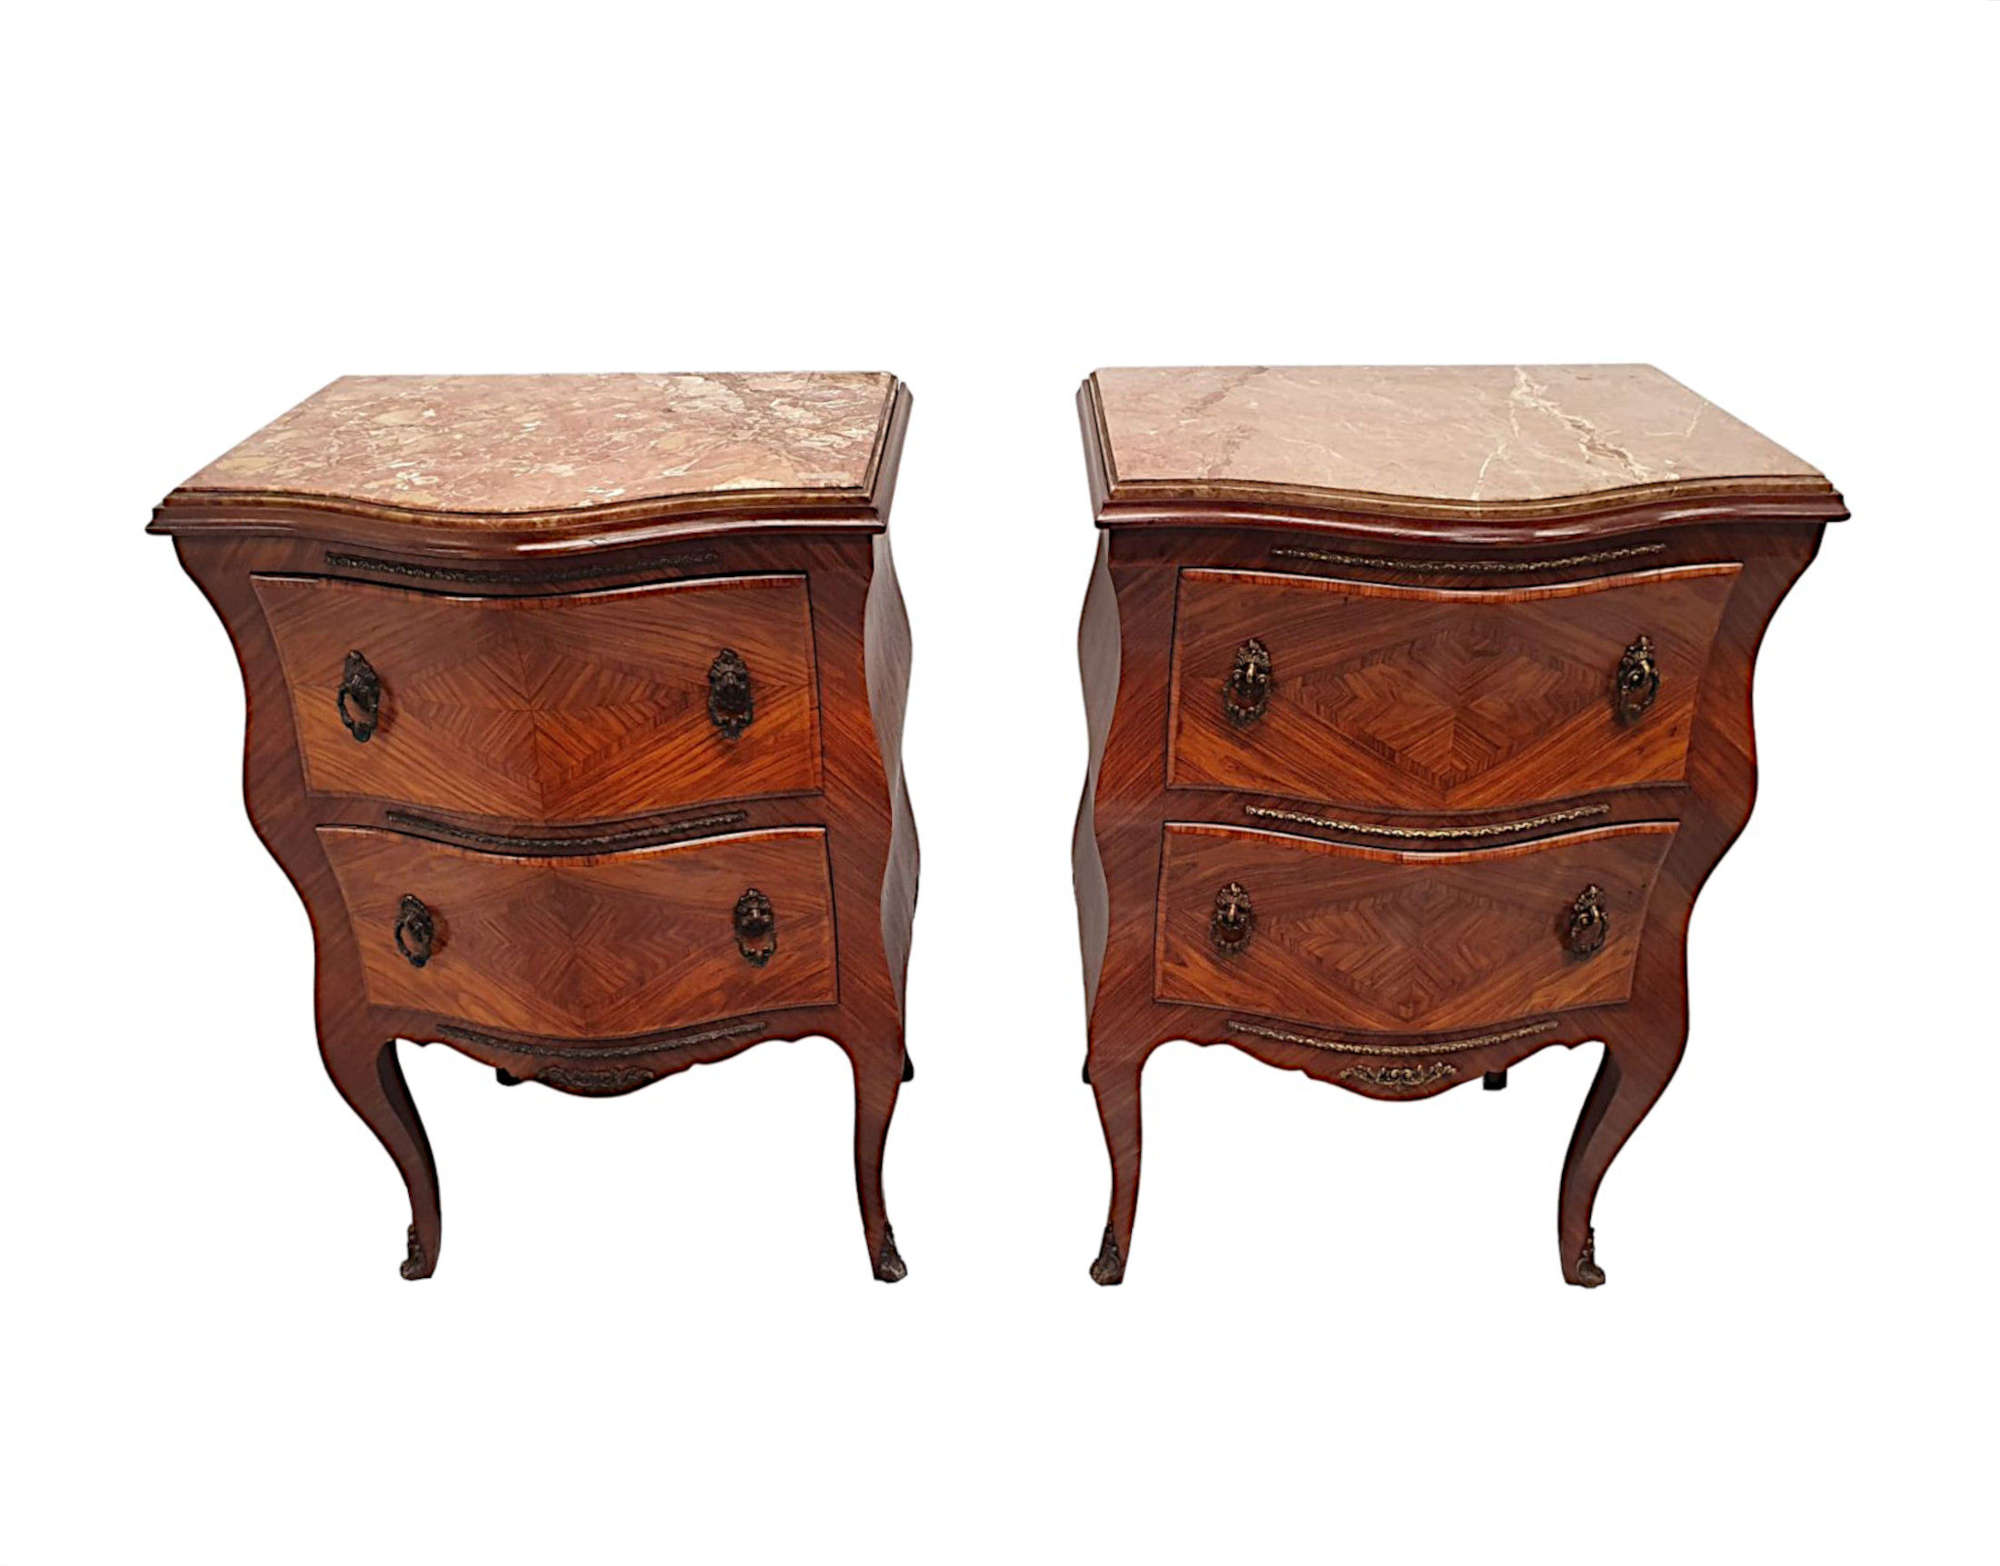 A Very Fine Pair Of 19th Century Large Marble Top Chests